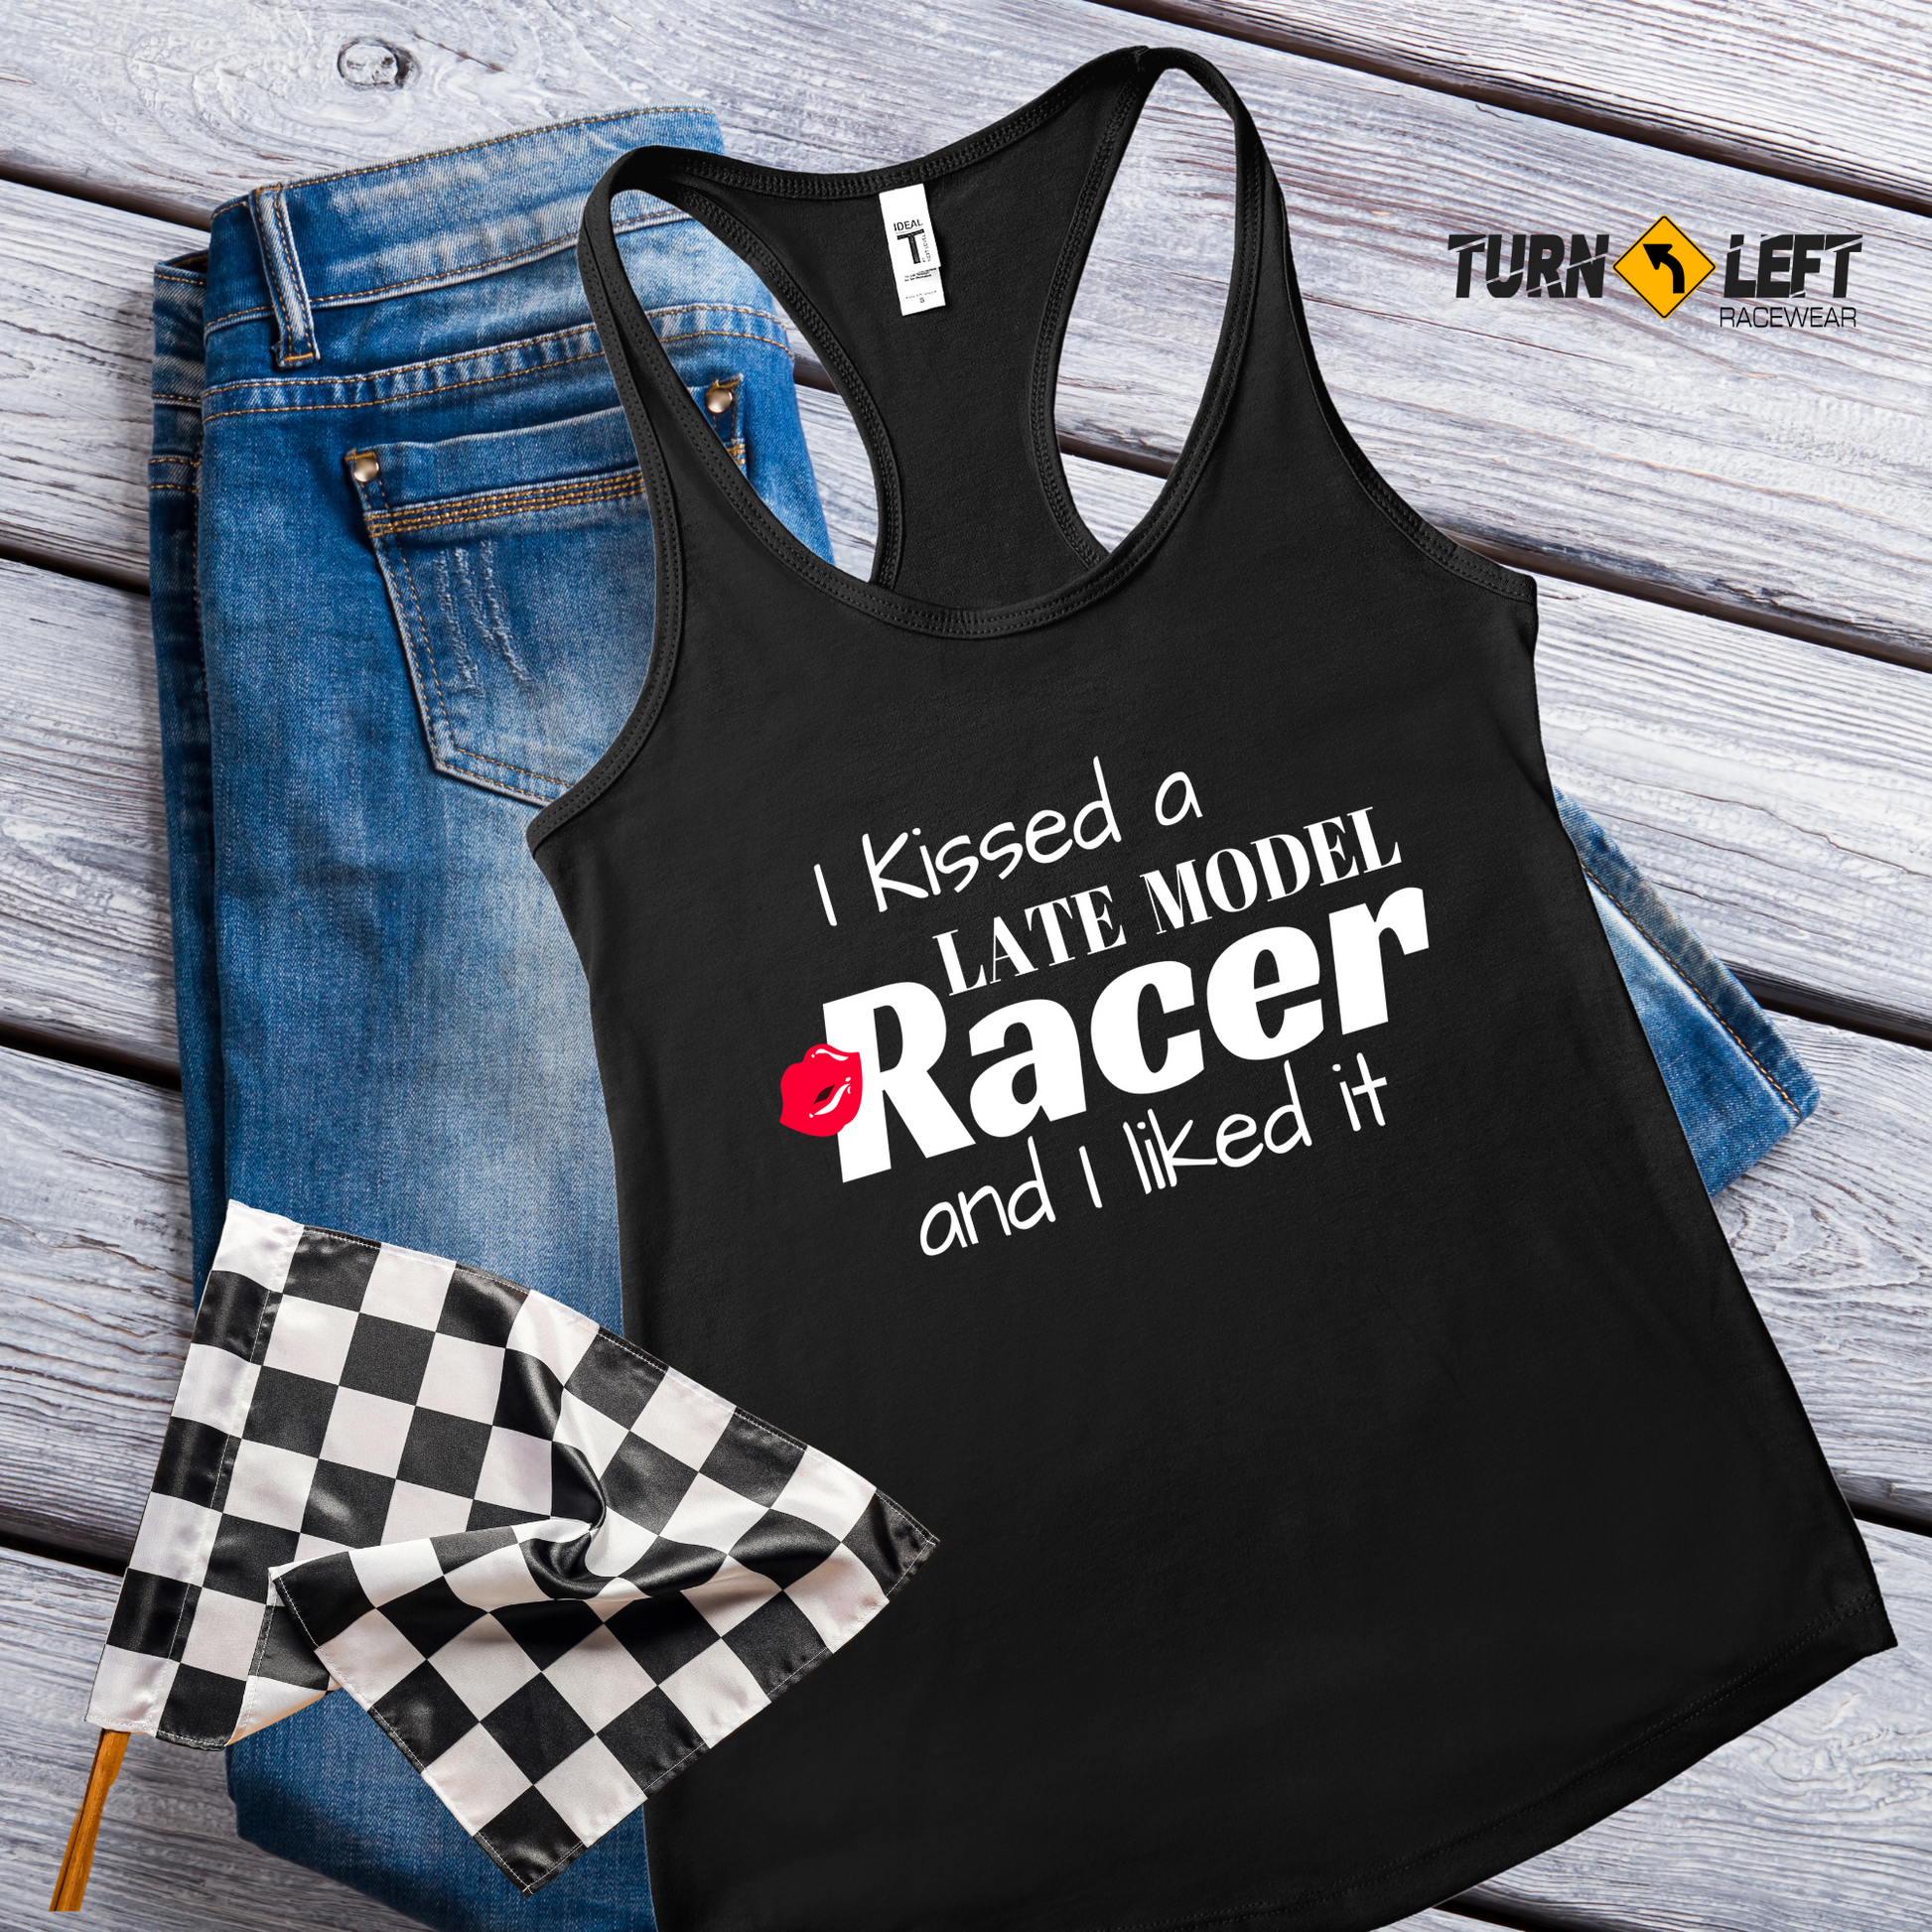 I KISSED A LATE MODEL RACER AND I LIKED IT WOMEN TANK TOP